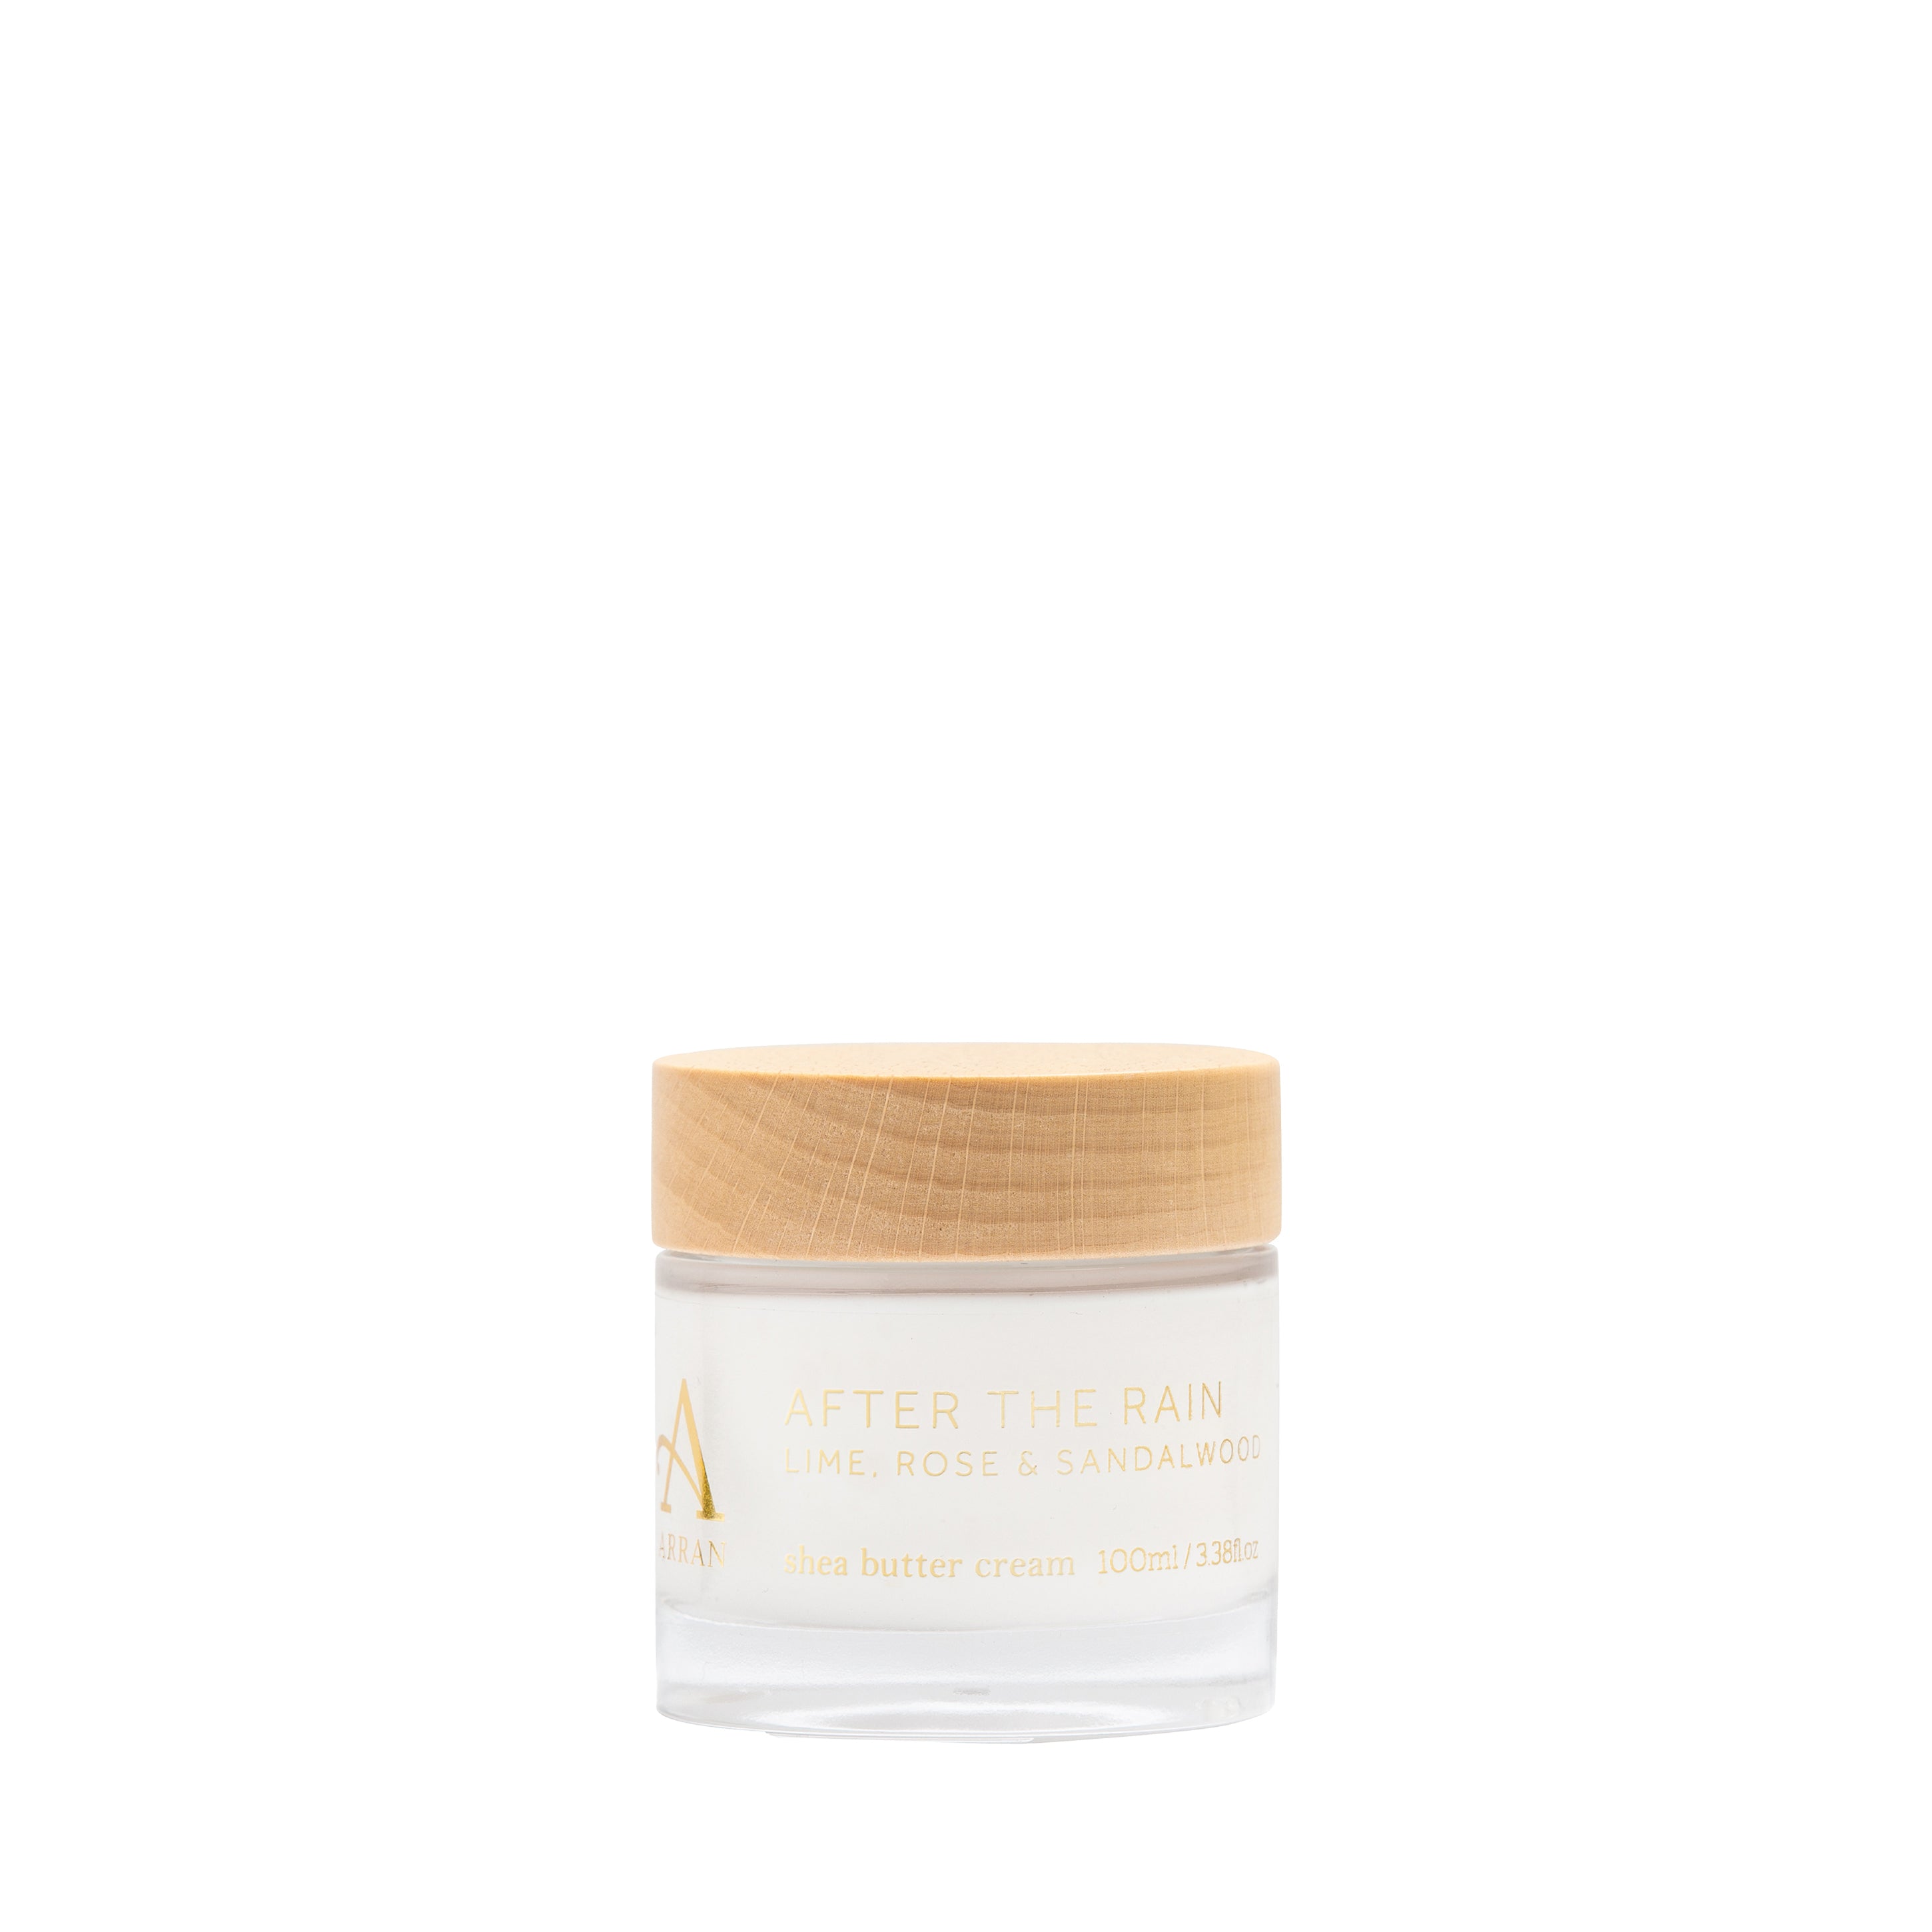 An image of ARRAN After The Rain Shea Body Butter | Made in Scotland | Lime, Rose & Sandalwo...